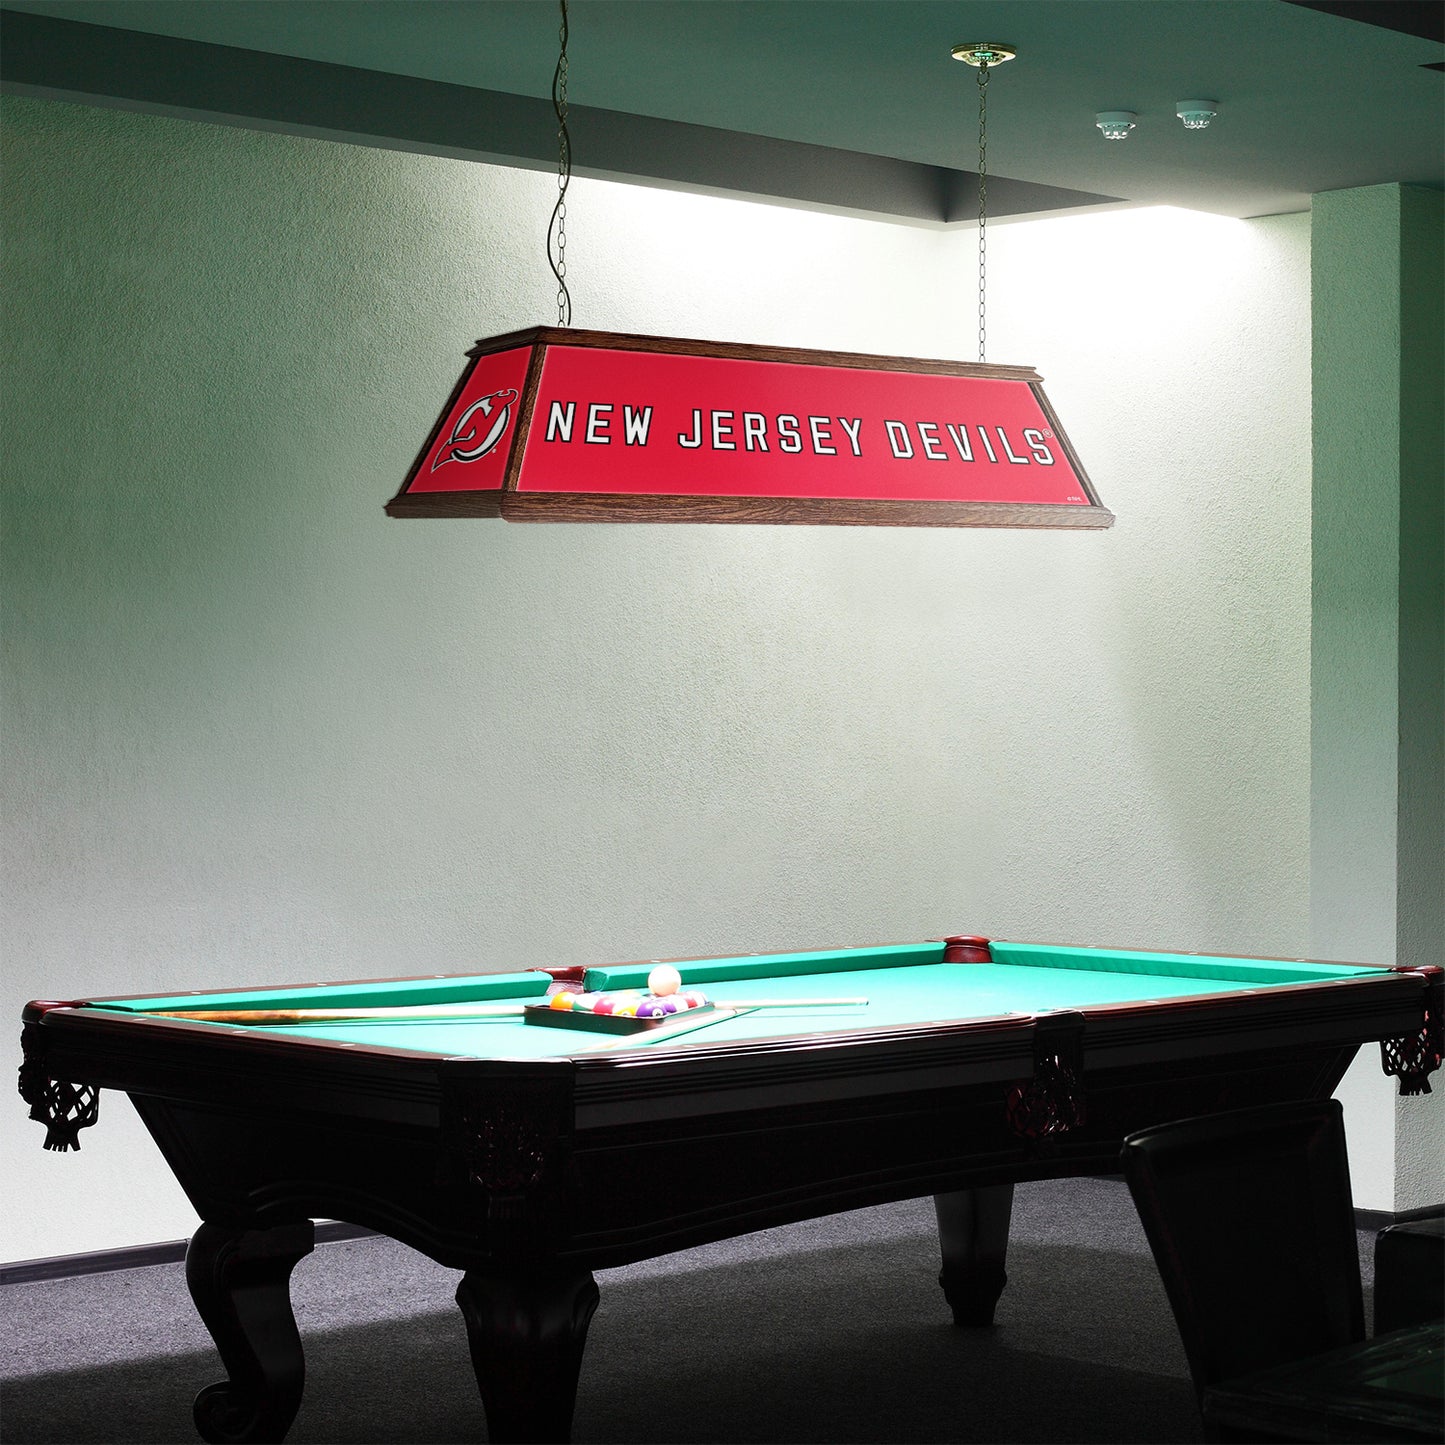 New Jersey Devils Premium Pool Table Light Room View